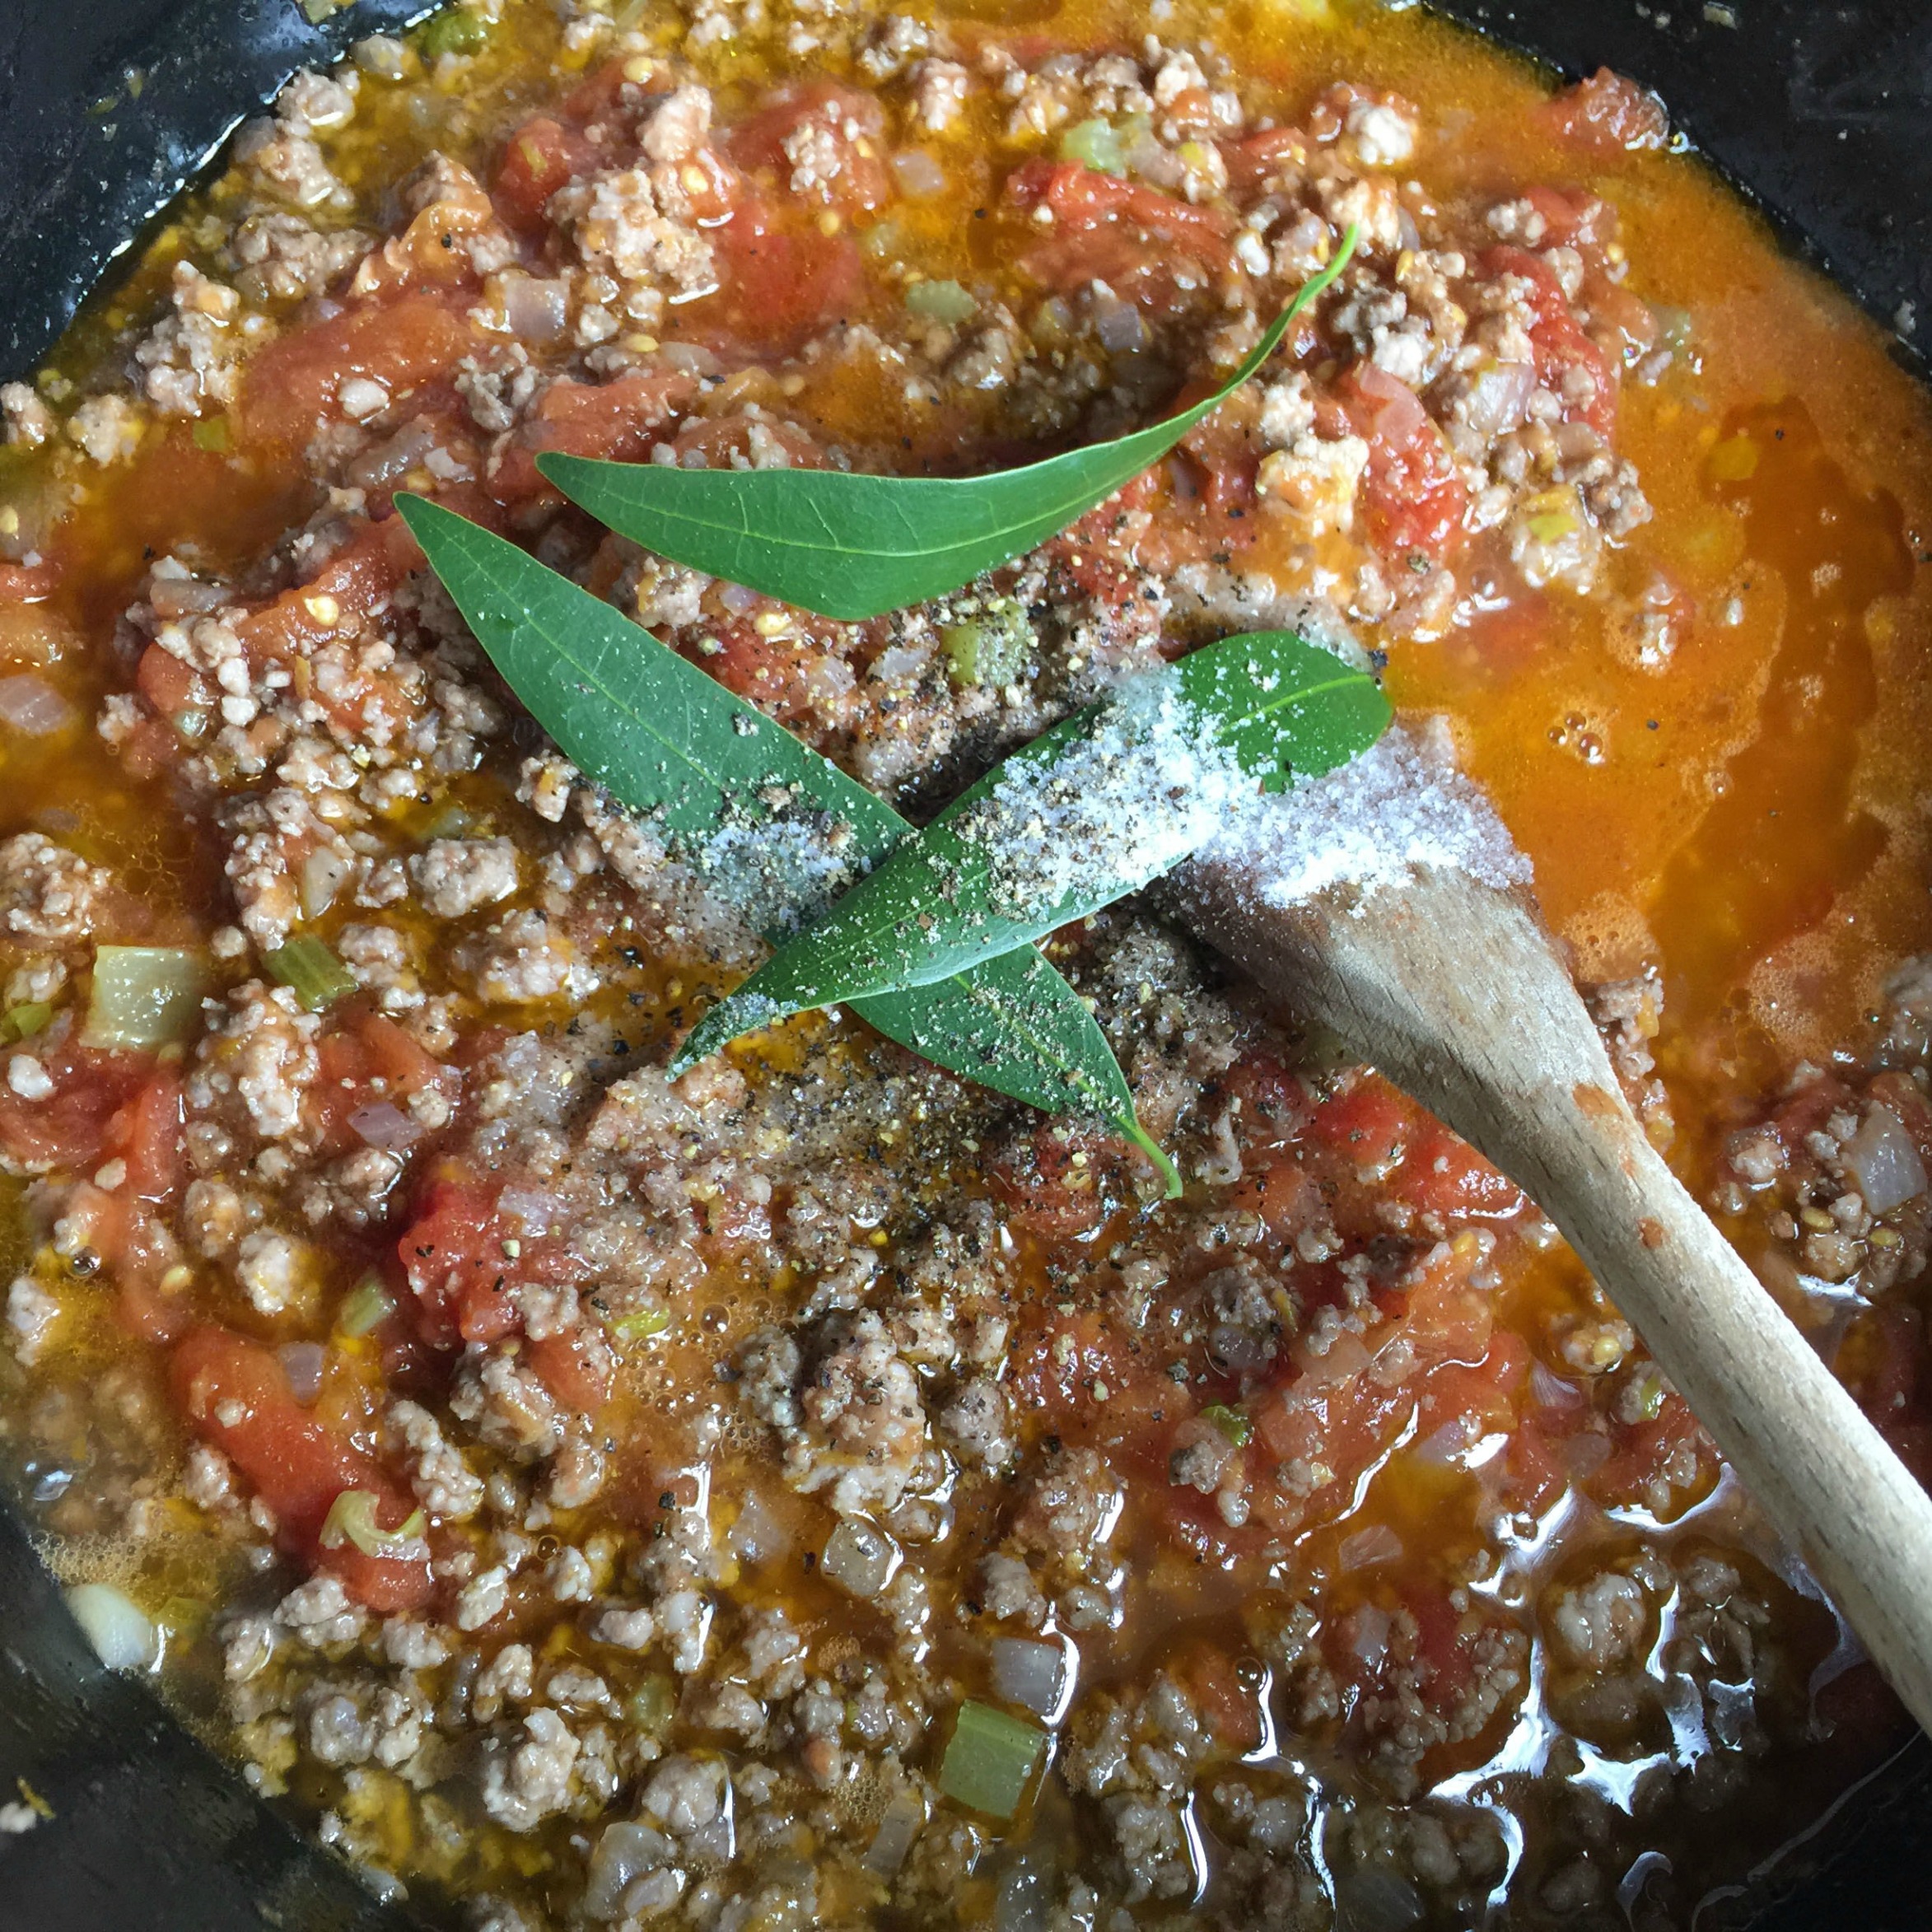 Lidia Bastianch's Meat Sauce Bolognese